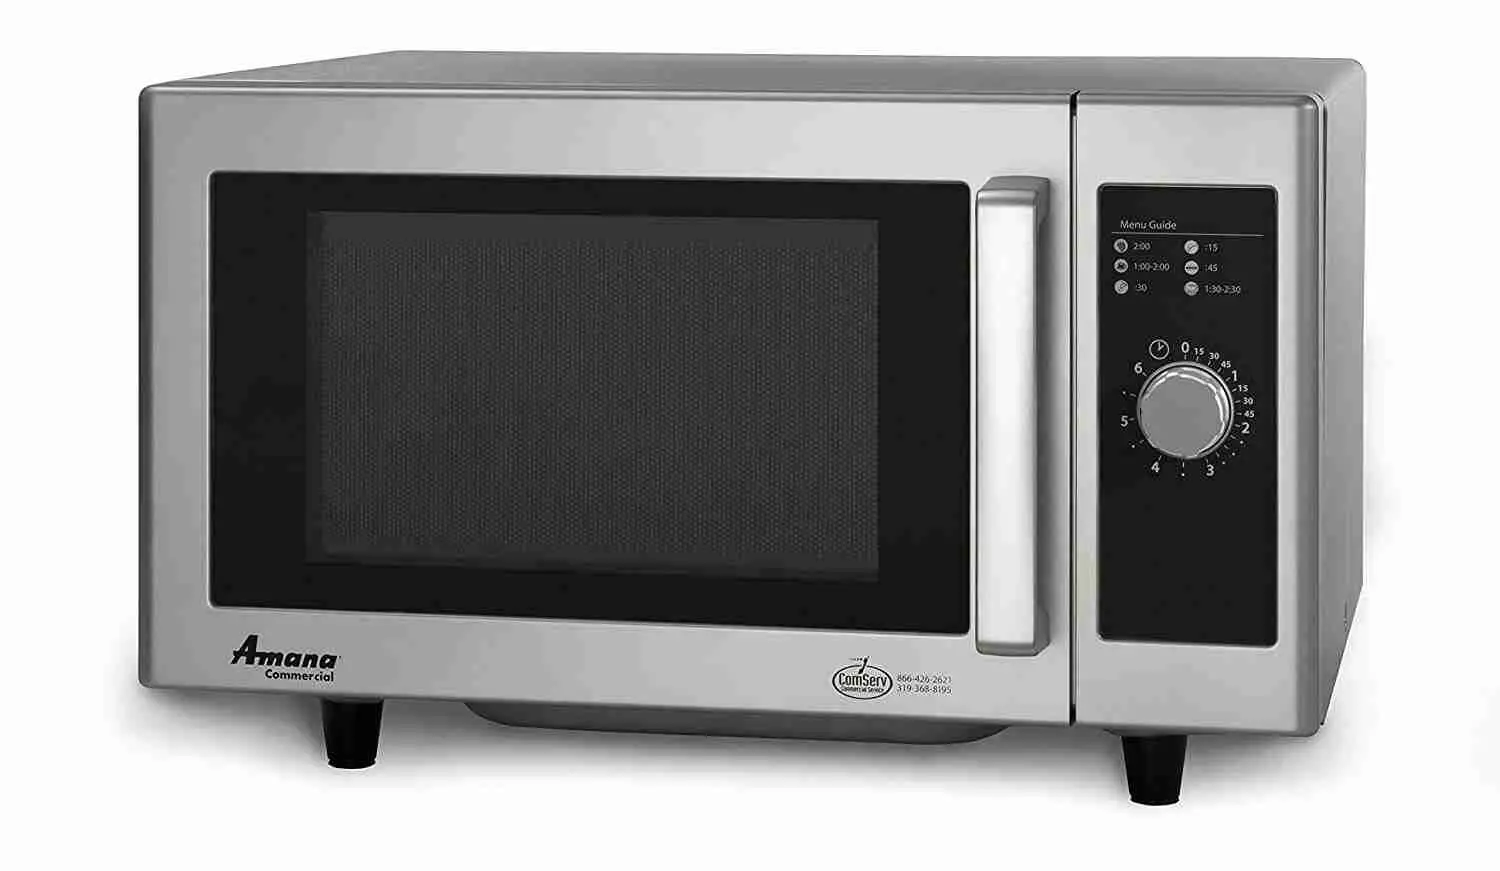 4 BEST SIMPLE TO USE MICROWAVE FOR ELDERLY UK